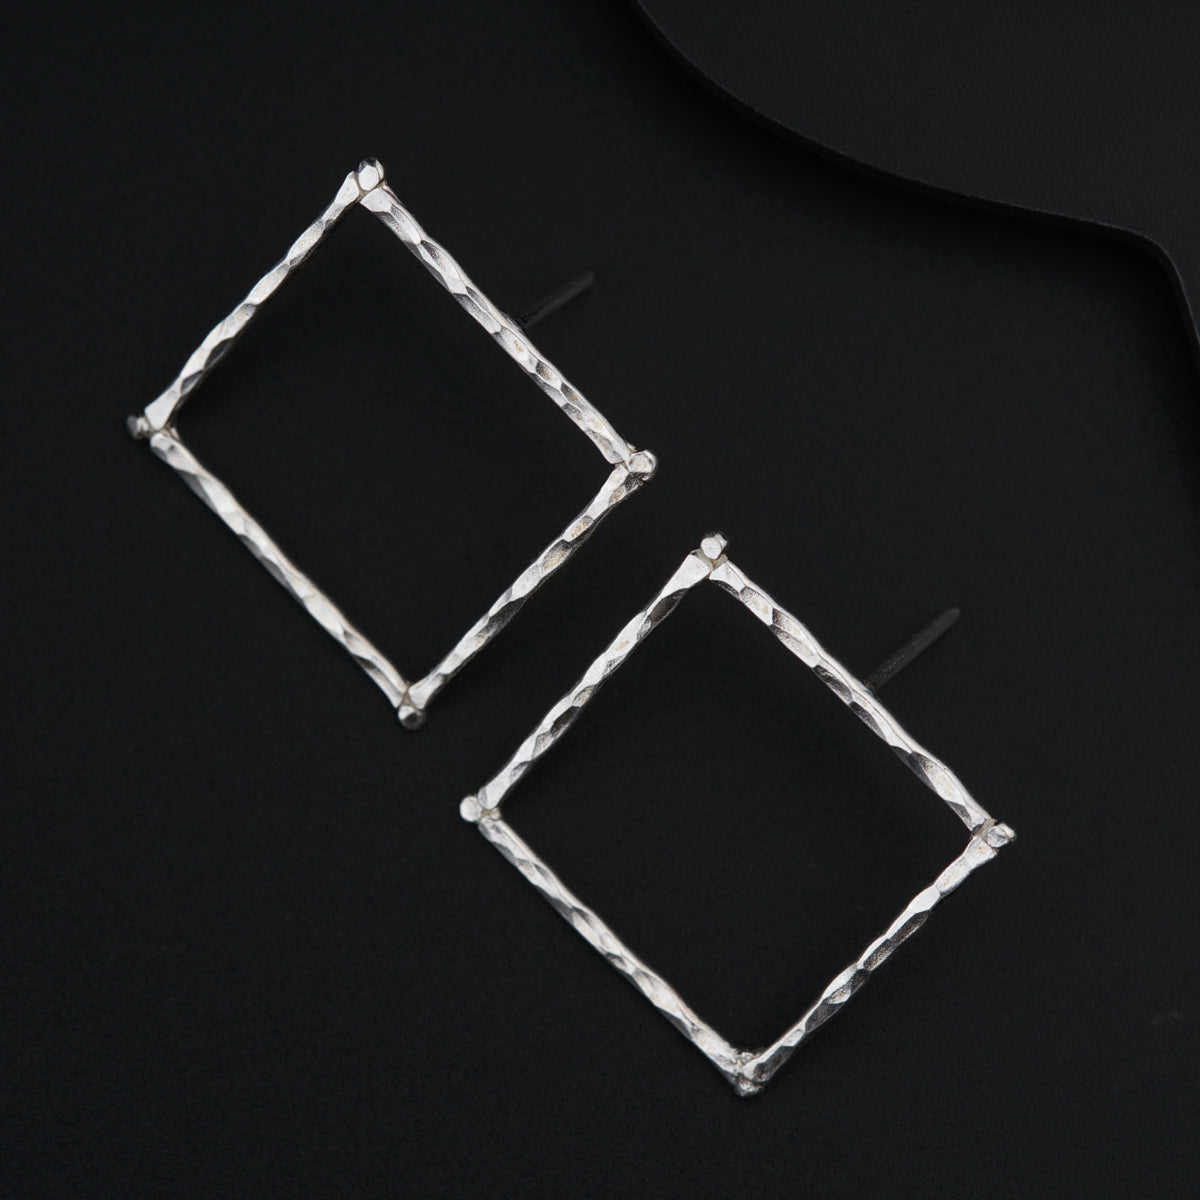 a pair of square shaped earrings sitting on top of a black surface